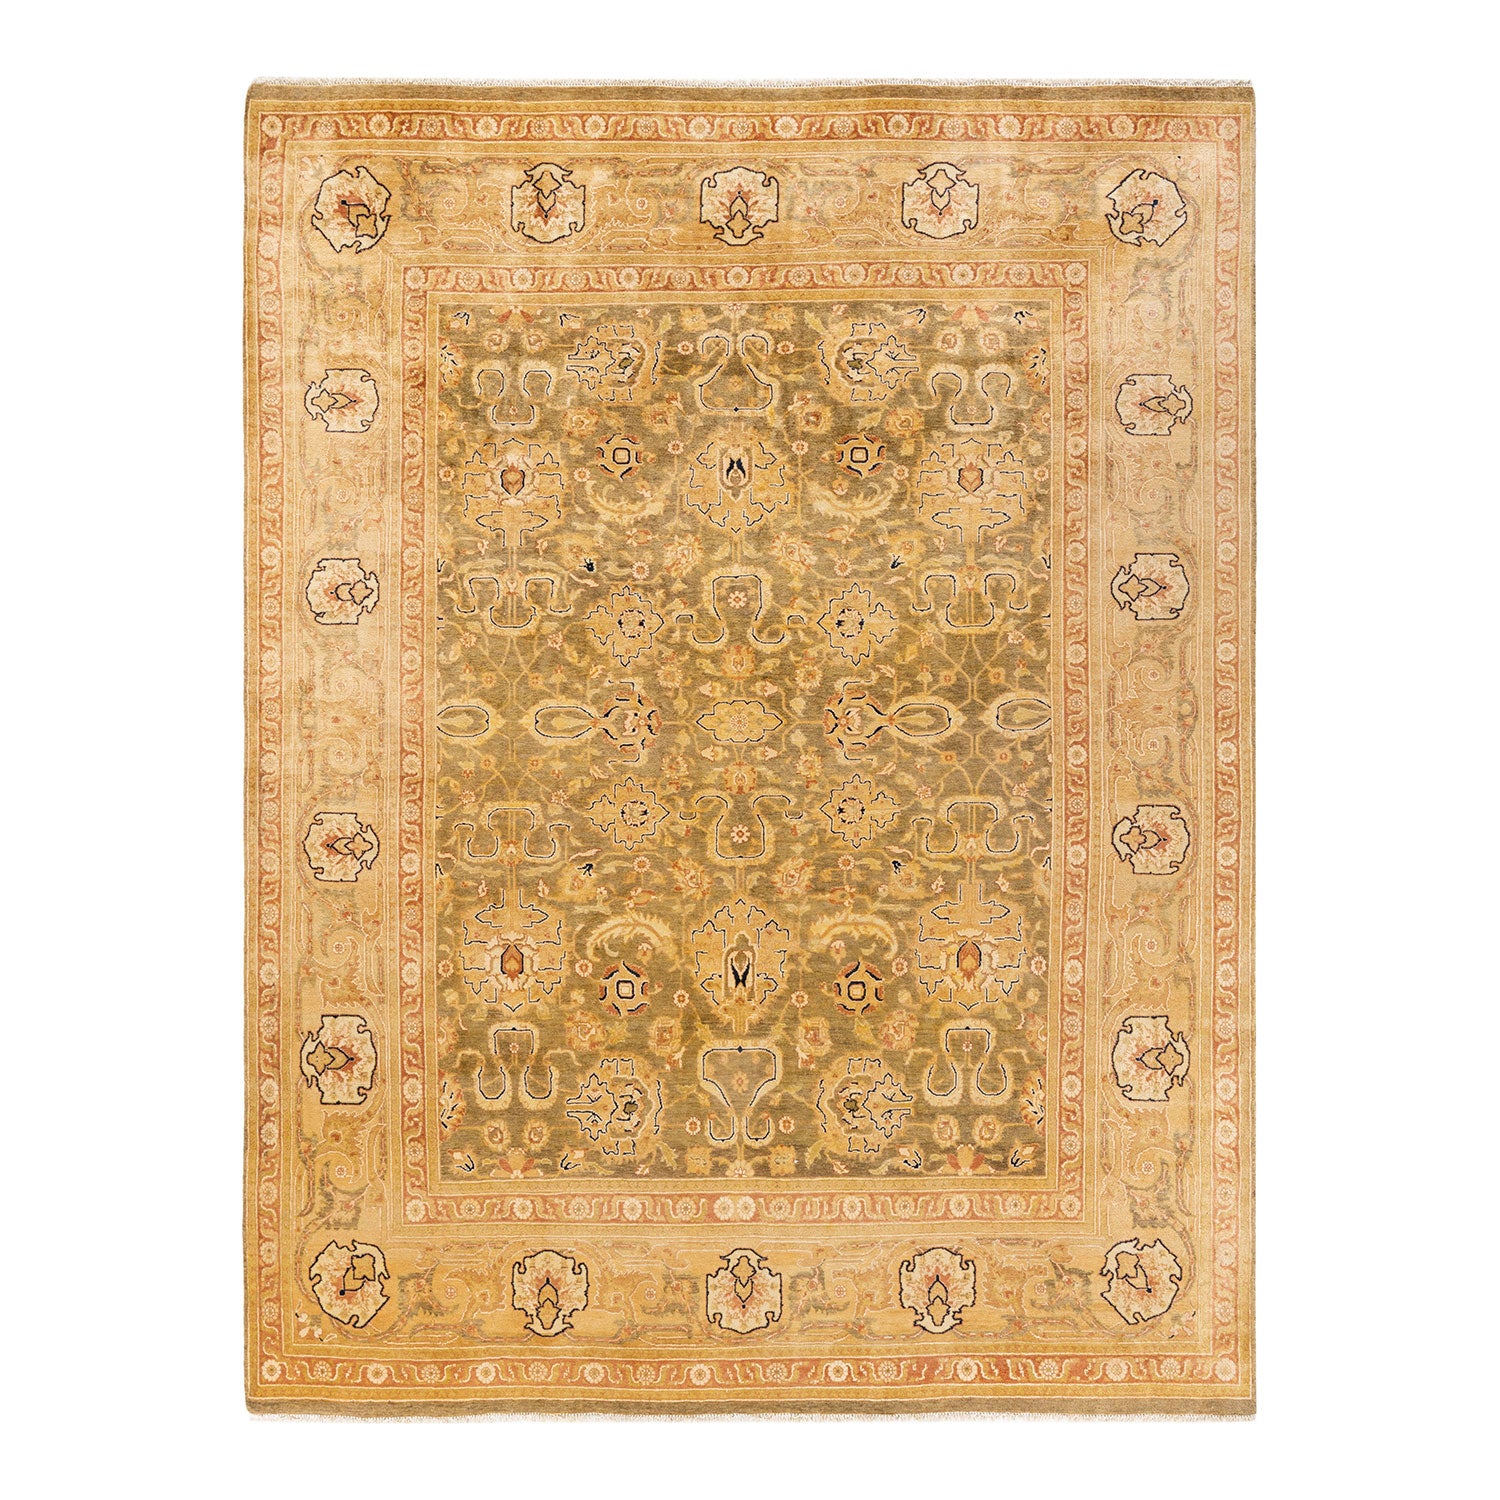 Exquisite Persian-style rug with intricate floral and geometric motifs